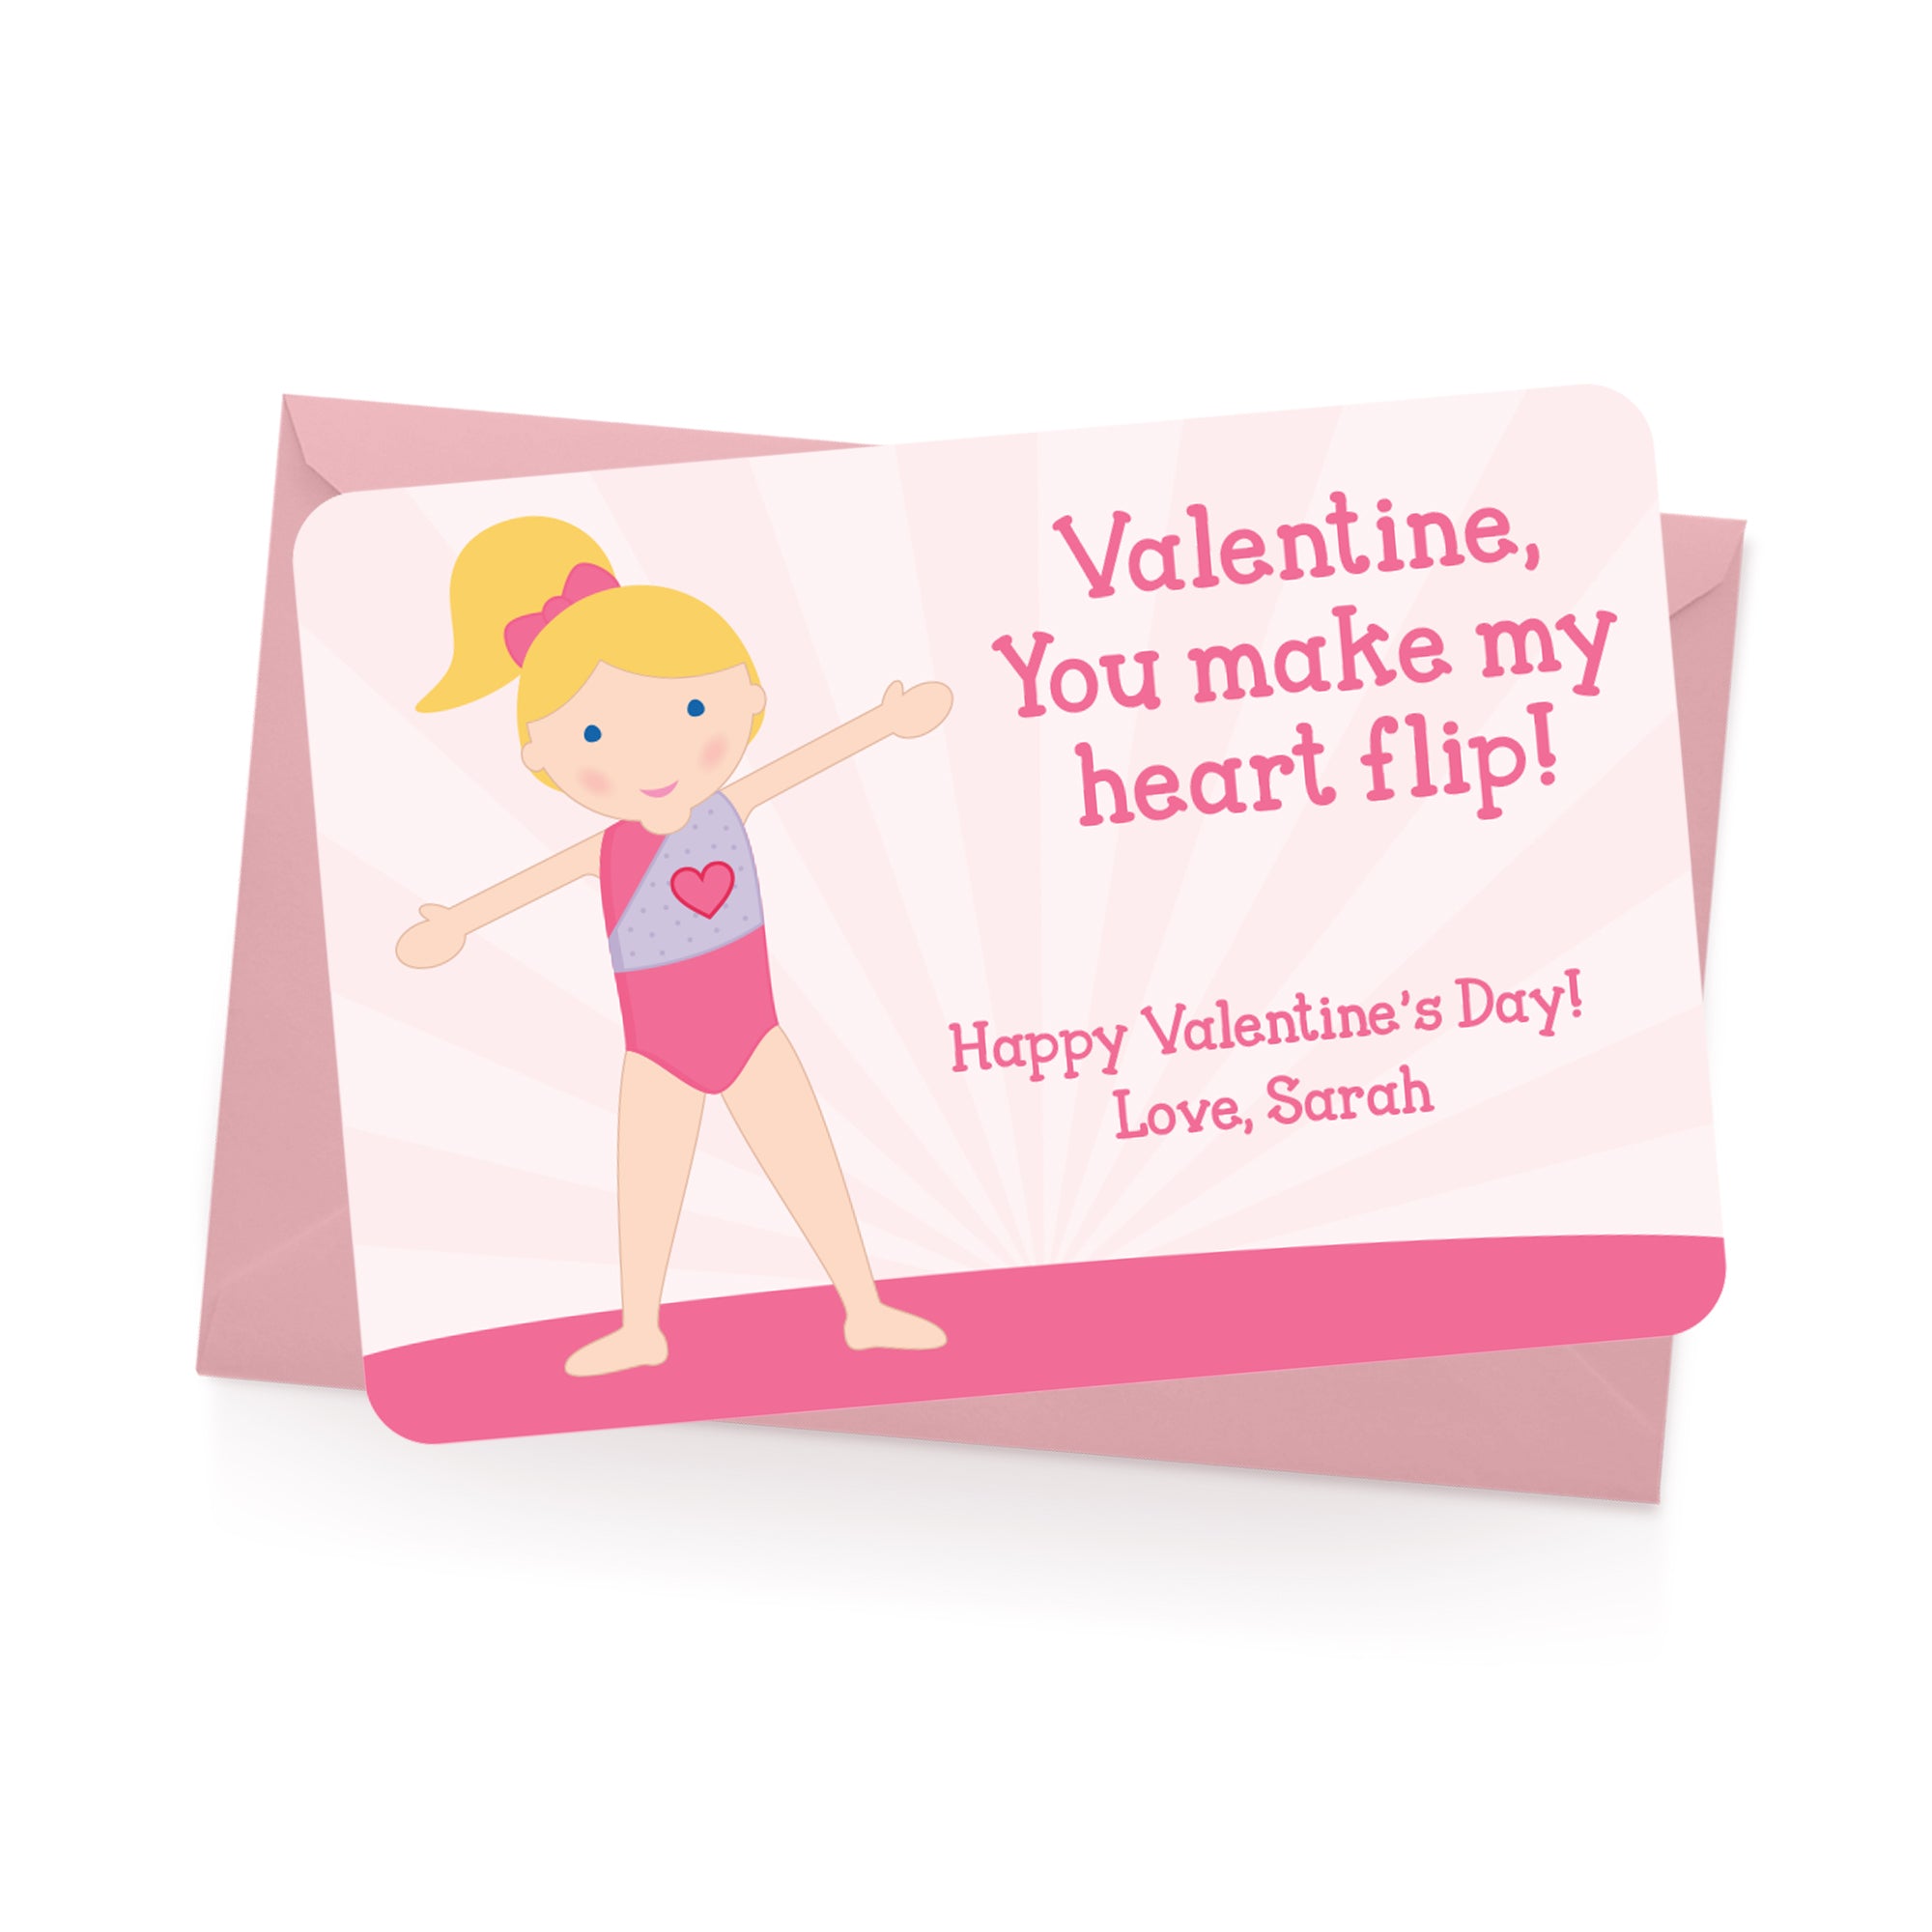 Gymnast Personalized Valentine's Day Cards | Tickled Peach ...